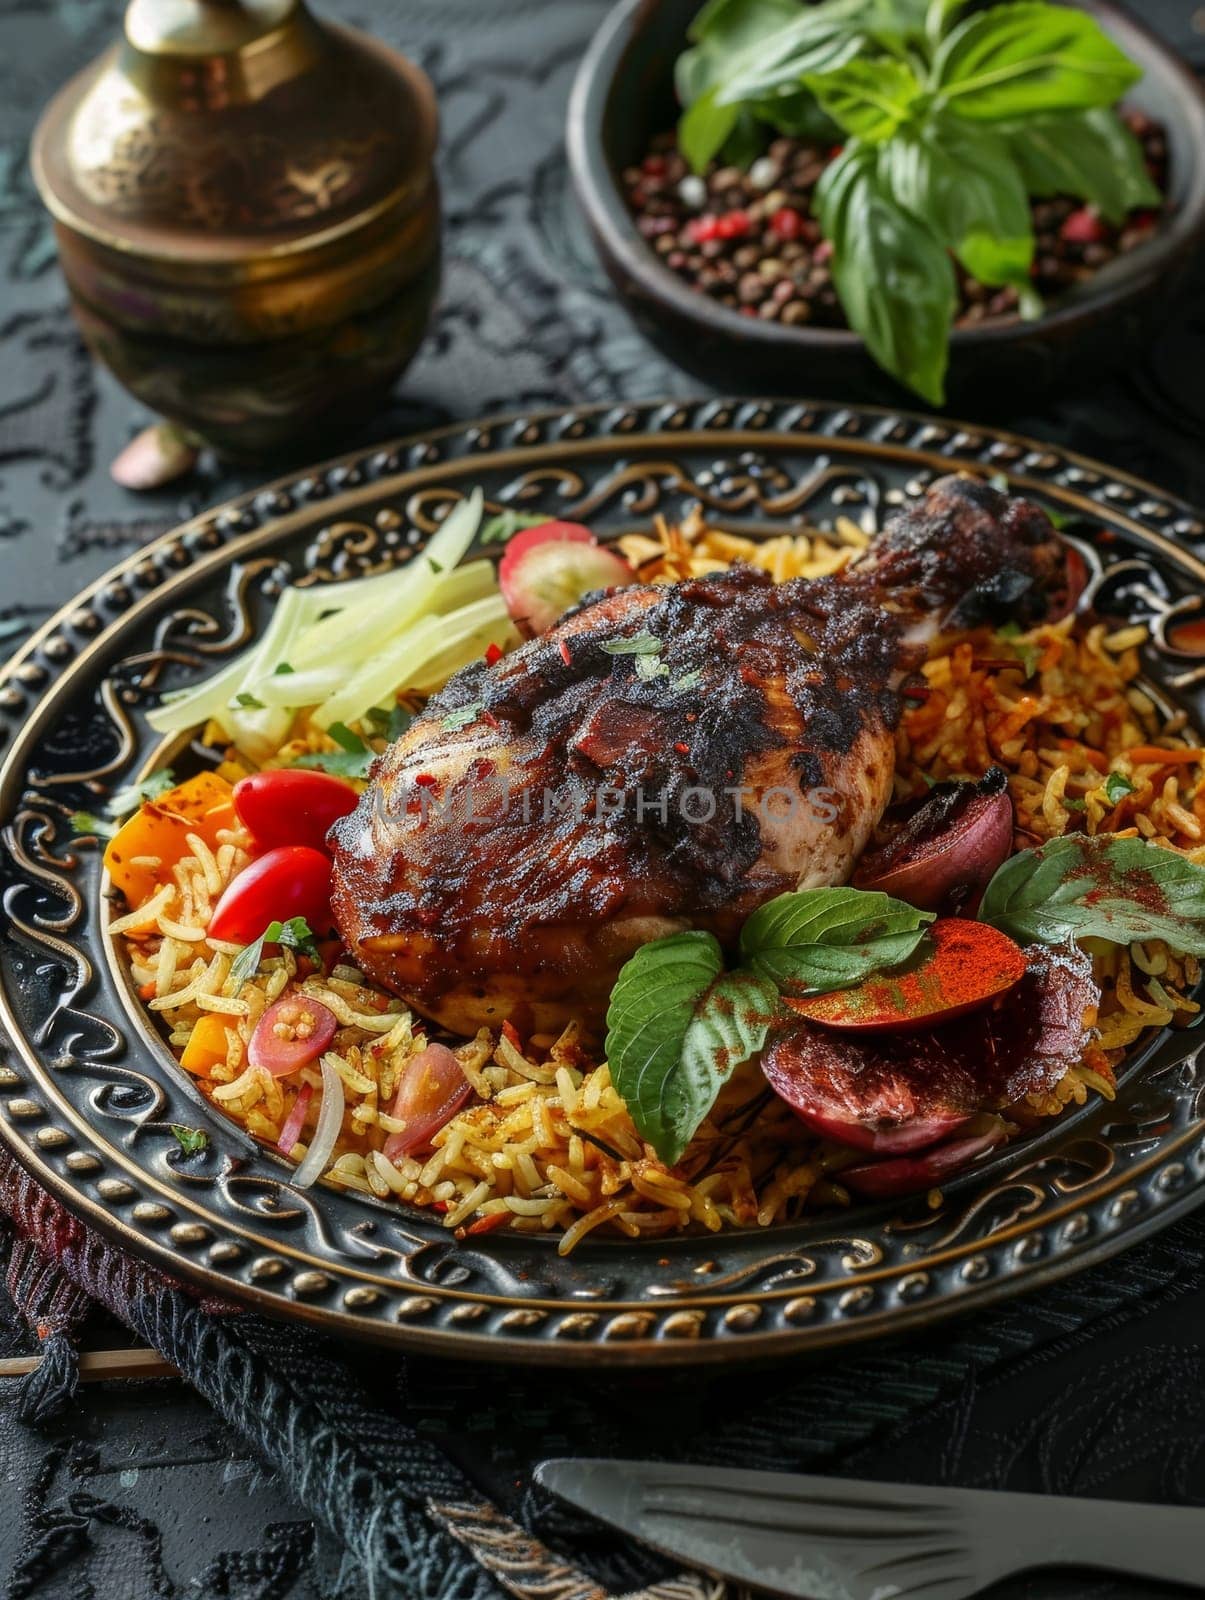 Authentic Kuwaiti machboos, a fragrant and flavorful spiced rice dish with tender chicken or lamb, beautifully presented on a decorative plate - a mouthwatering representation of the traditions